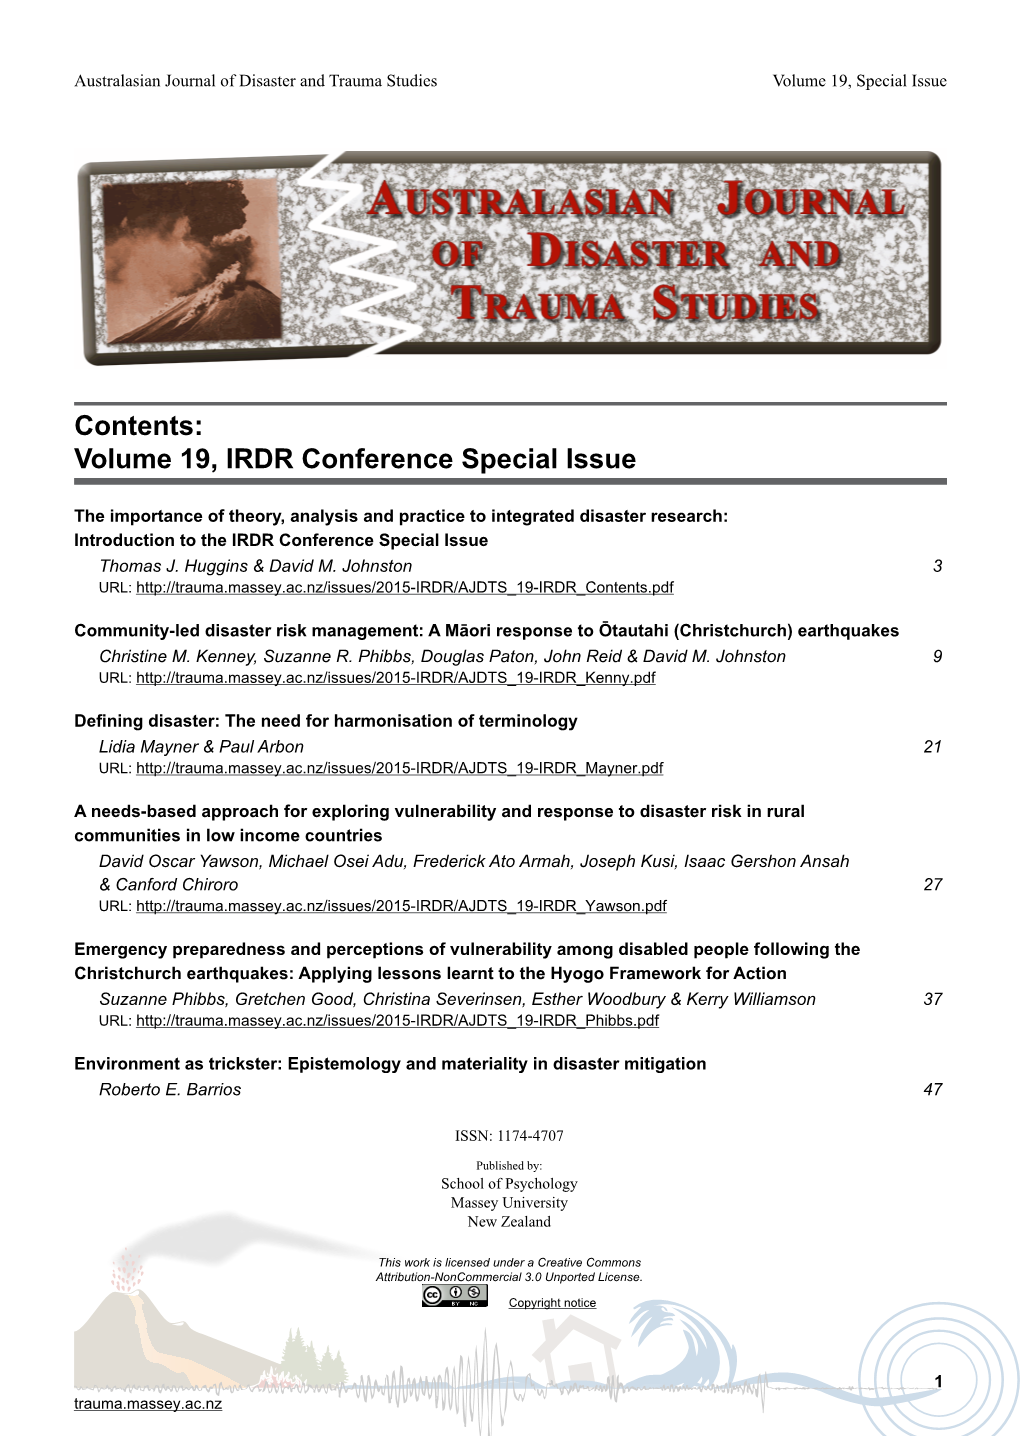 Volume 19, IRDR Conference Special Issue